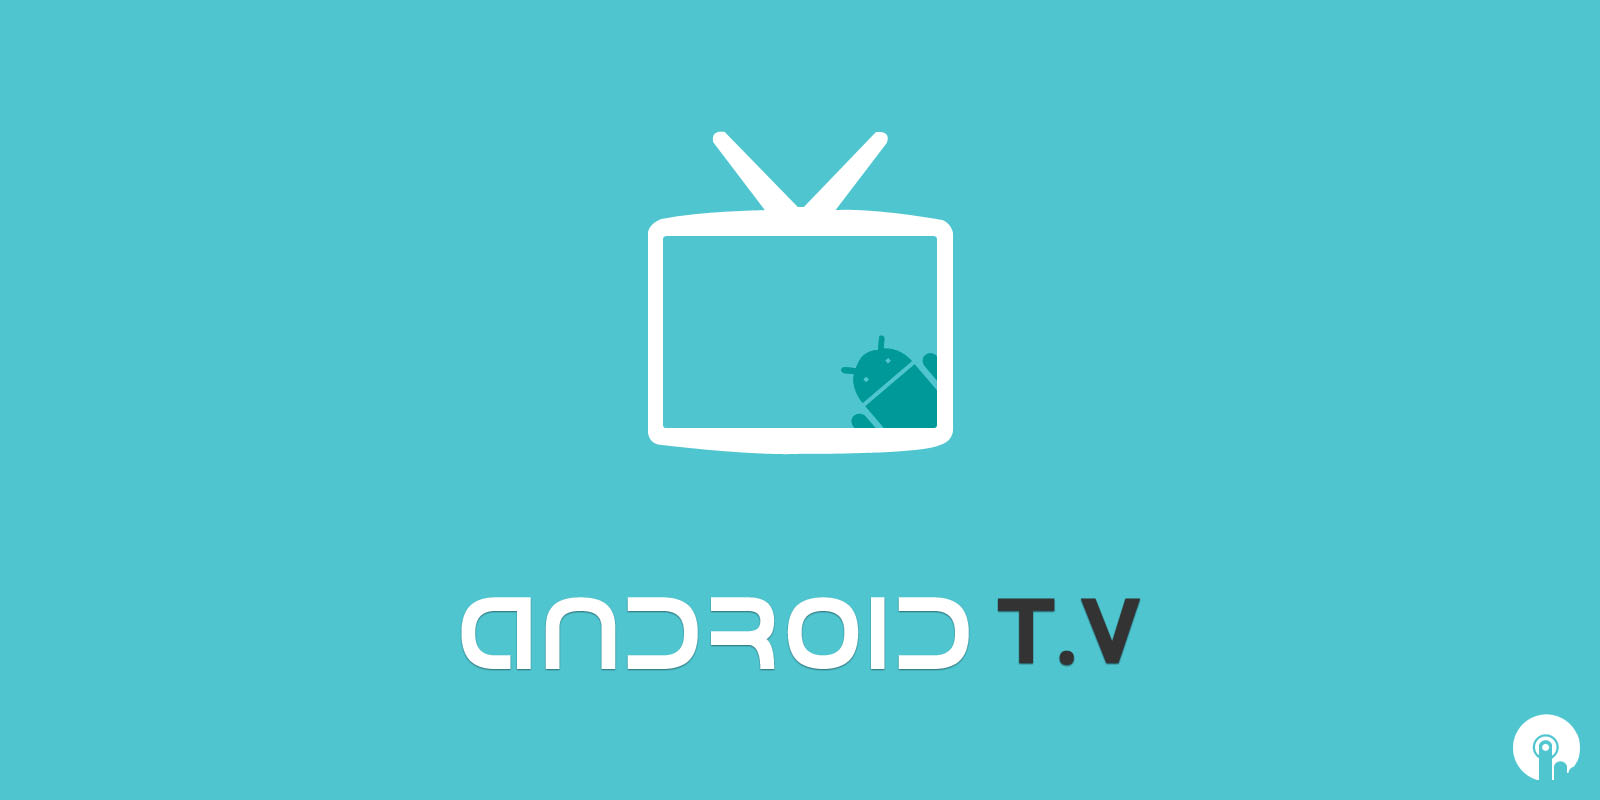 Android Presents it's TV